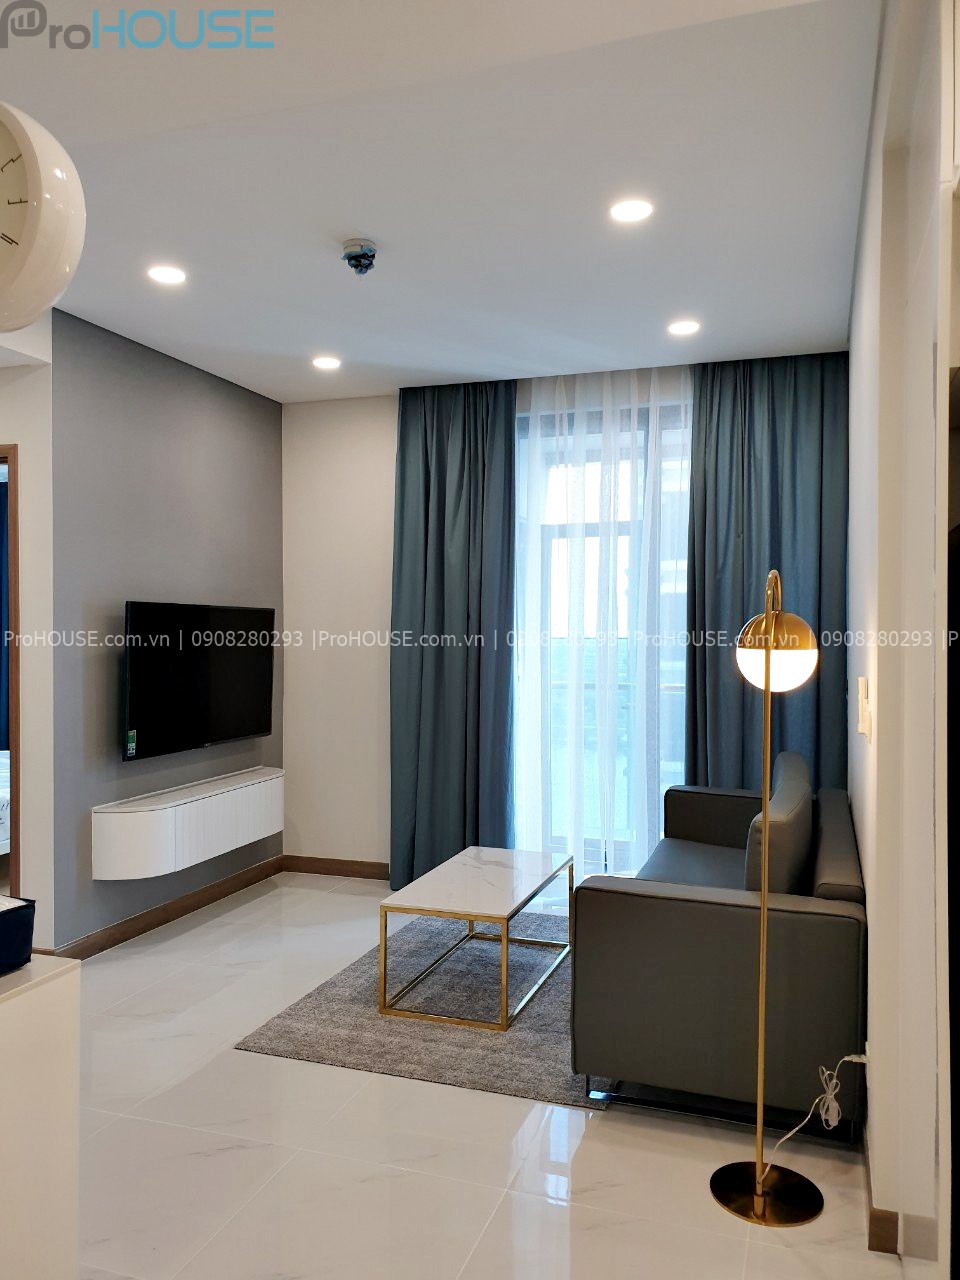 Foreign owner wants to sell 1 bedroom luxury apartment at Sunwah Pearl